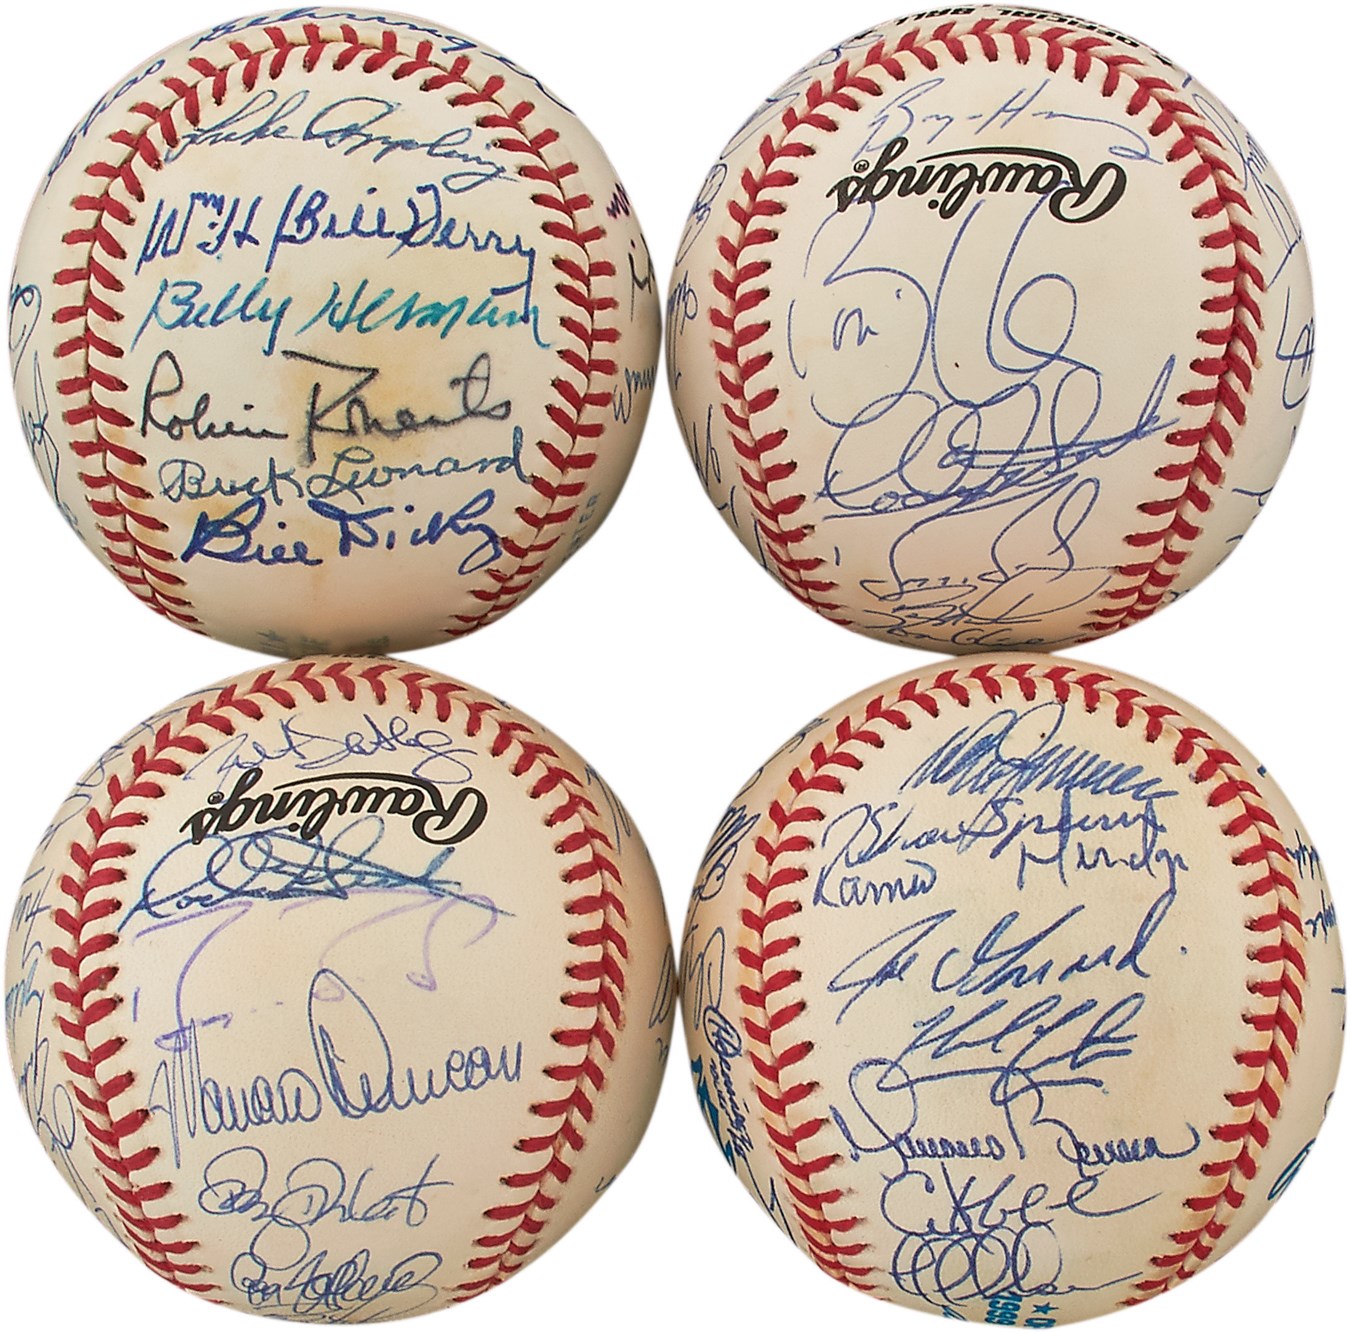 - Interesting Hall of Fame, All-Star and Team-Signed Baseballs (4)